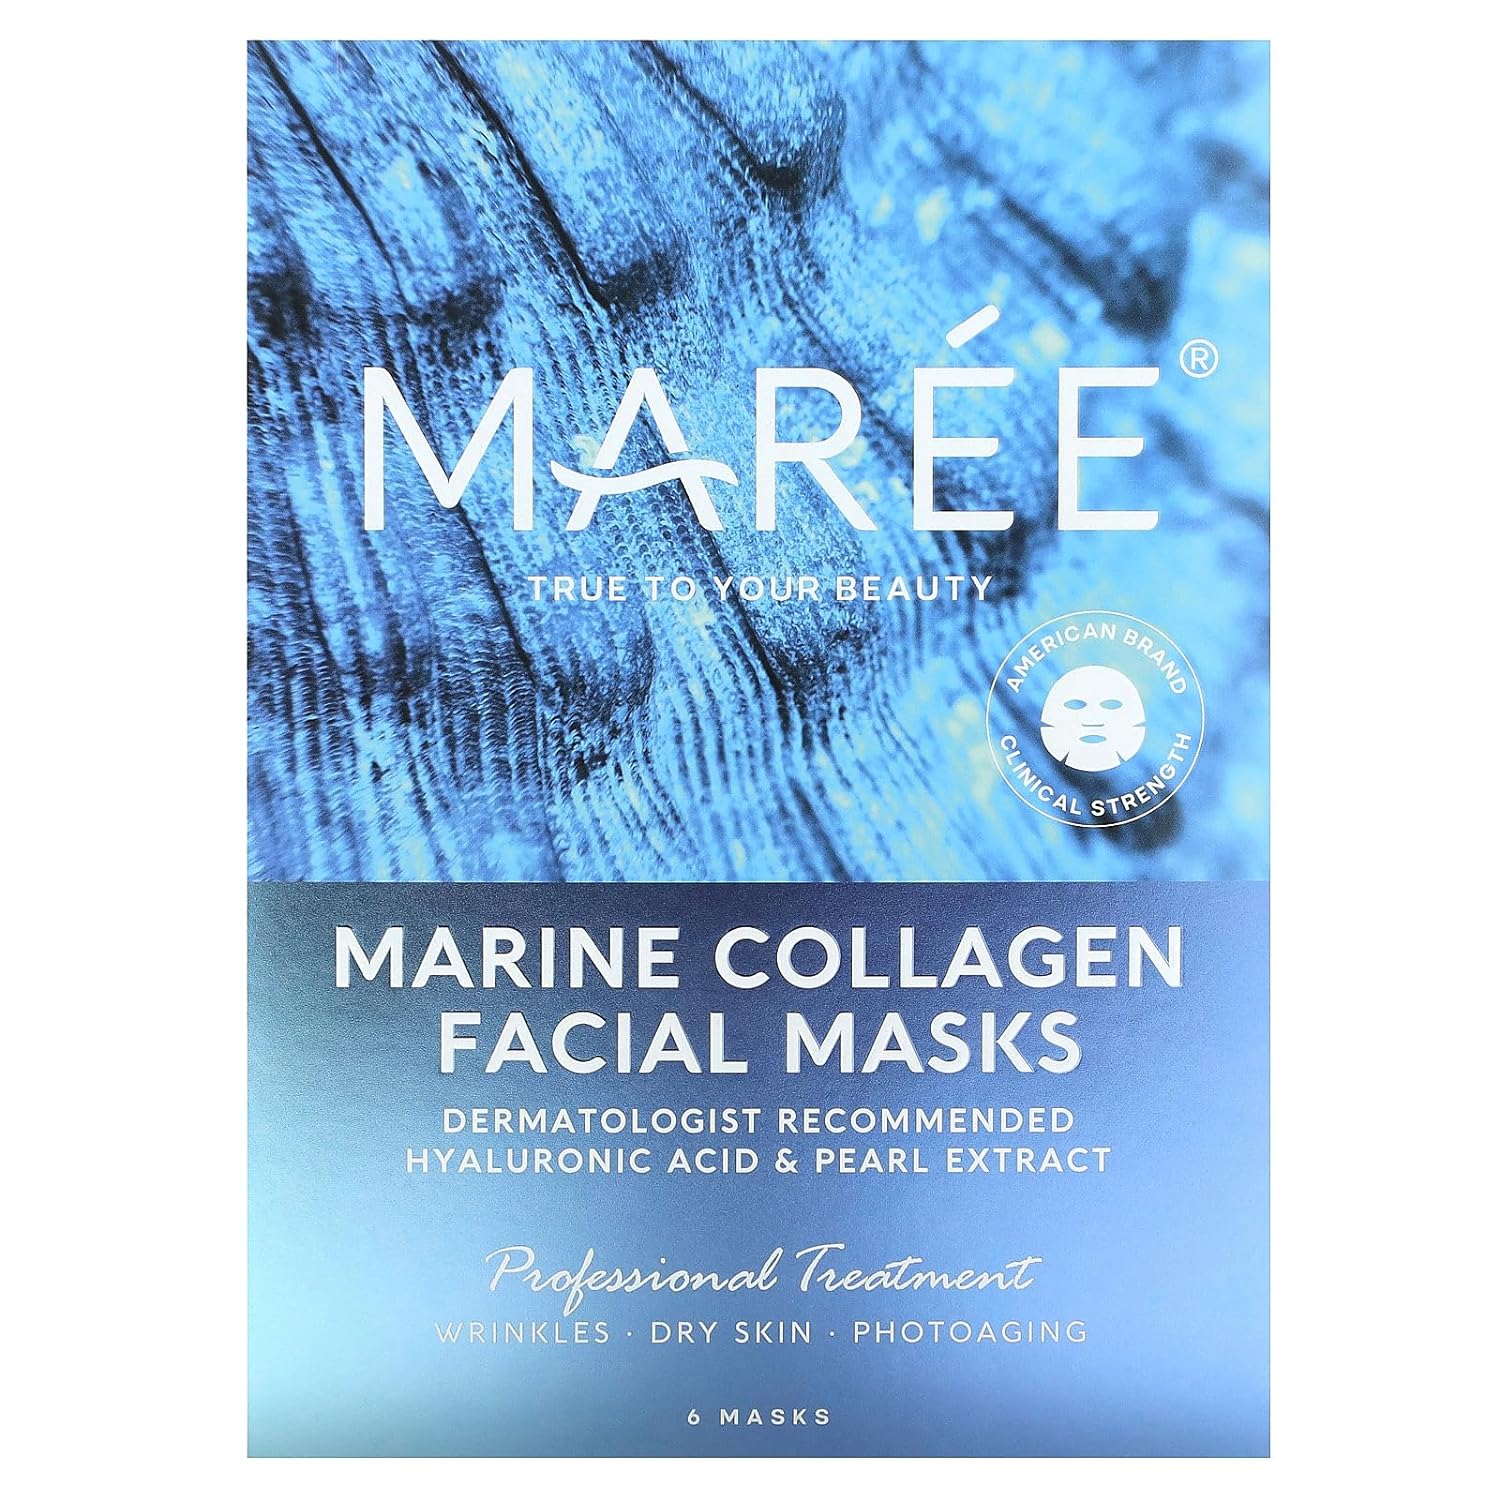 MAREE Cooling Face Masks for Eyes  Beauty - Sheet Masks for Face with Natural Pearl Extract, Marine Collagen  Hyaluronic Acid - Anti Aging Collagen Facial Masks for Wrinkles  Dry Skin, 6 Pack